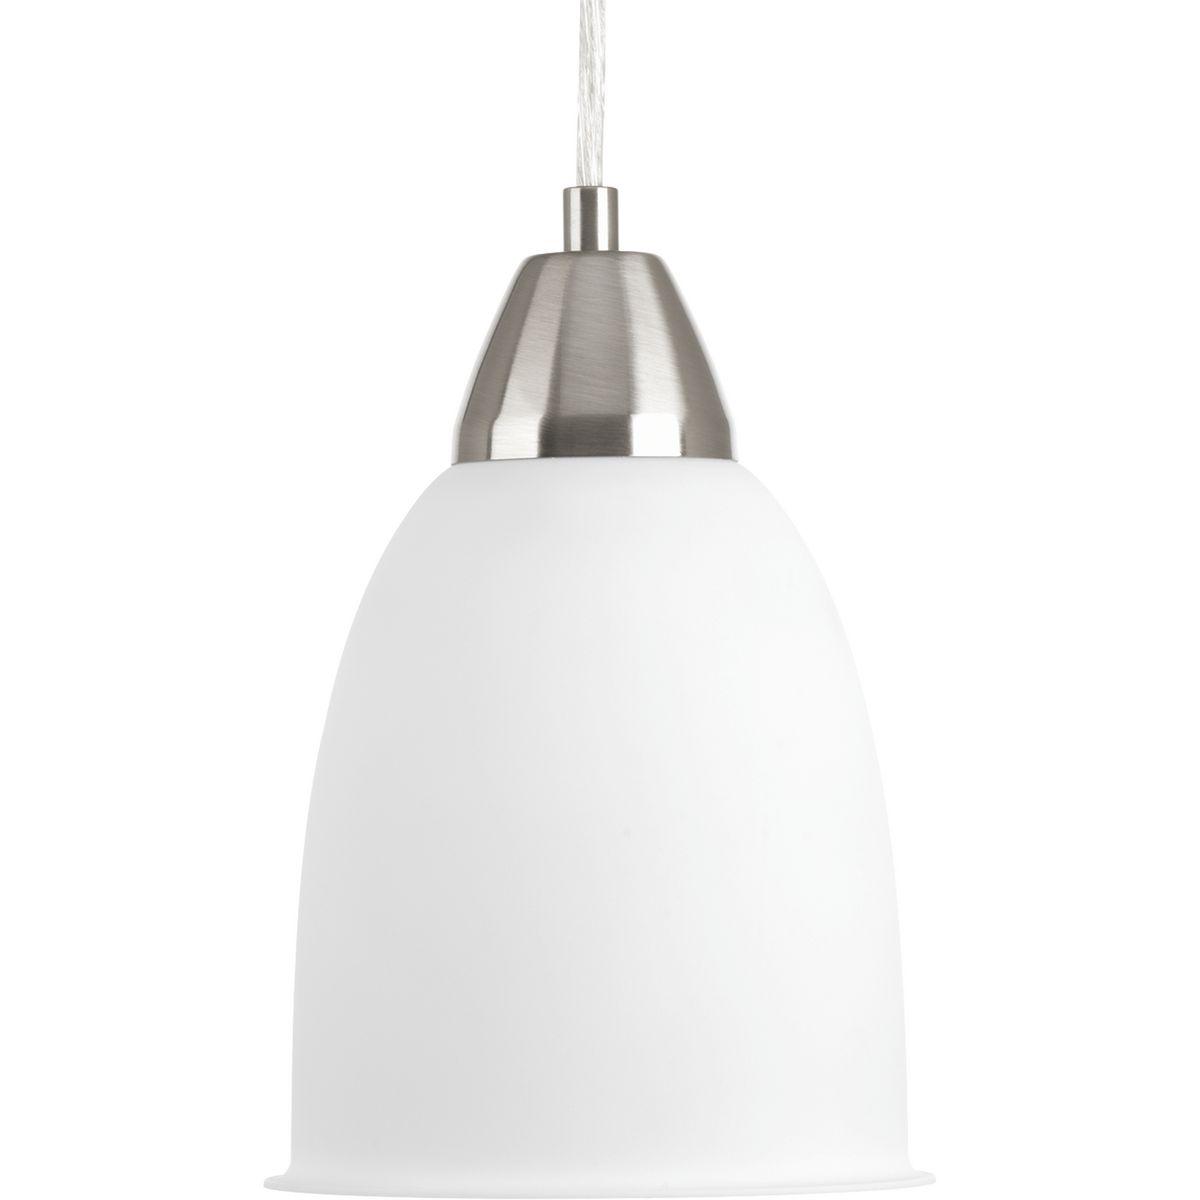 Hubbell P5176-0930K9 One-light cord-hung pendant with an LED source that is neatly tucked inside a frosted acrylic shade. A light commercial pendant ideal for restaurants, bar and hotel applications. Brushed Nickel finish.  ; Light commercial LED pendant. ; Frosted acrylic sh